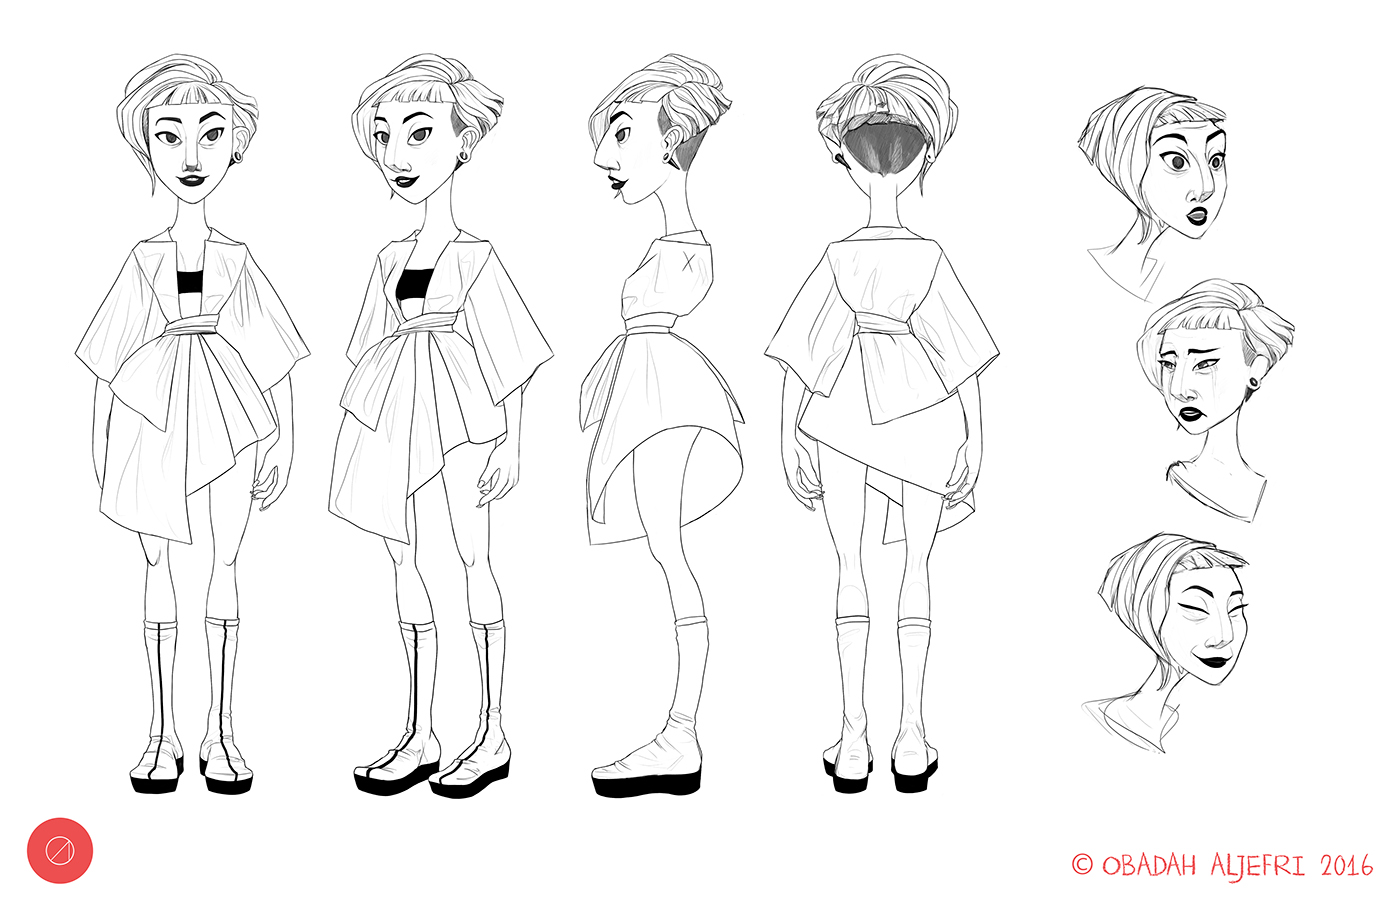 monkey boy turnarounds Lady japanese costume muscular man characters amazonian potoo gages edgy haircut Model Sheets